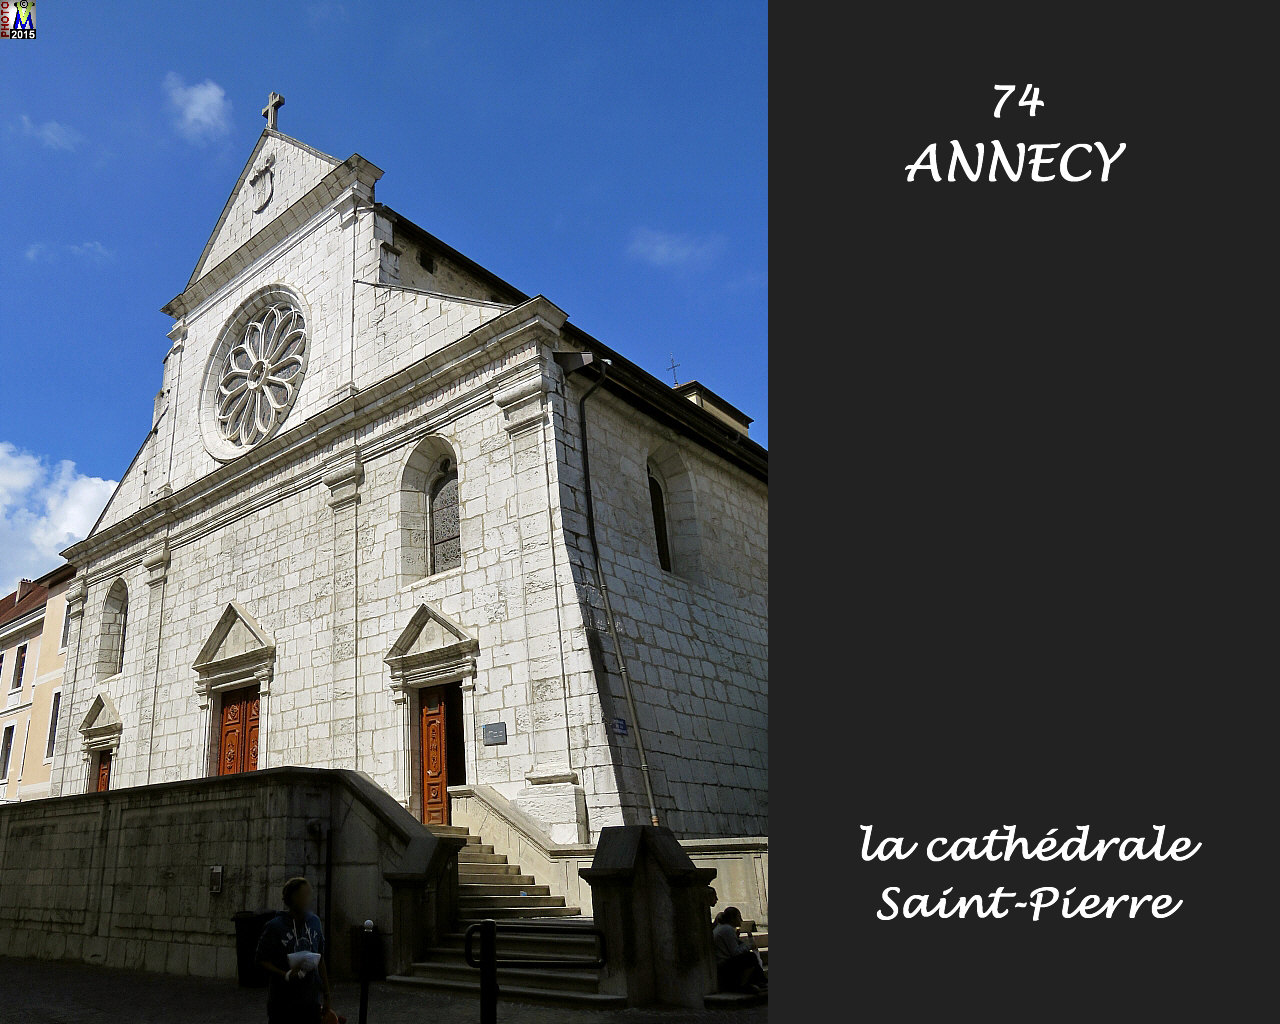 74ANNECY_cathedrale_100.jpg